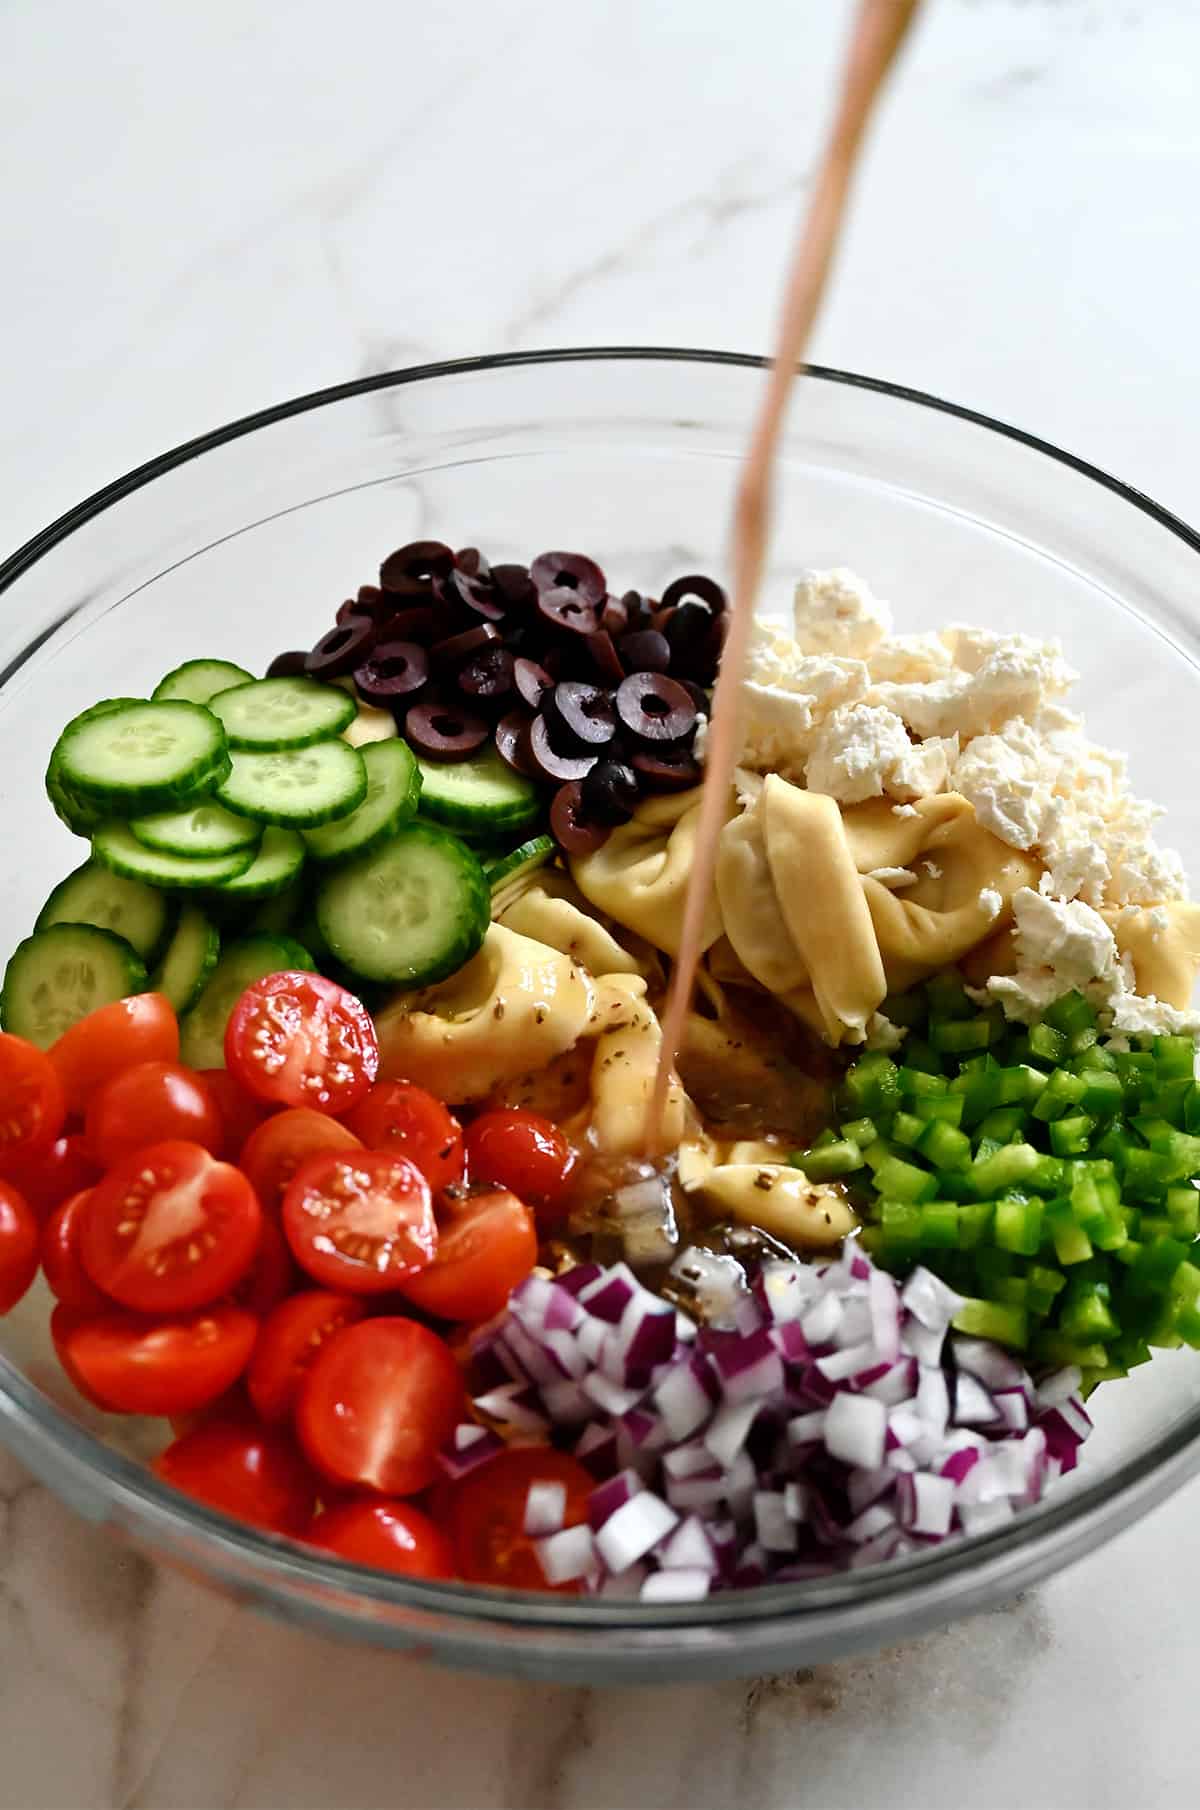 Vinaigrette being poured over halved cherry tomatoes, sliced cucumbers, olives, feta cheese, tortellini, and diced green pepper and red onion in a large clear bowl.